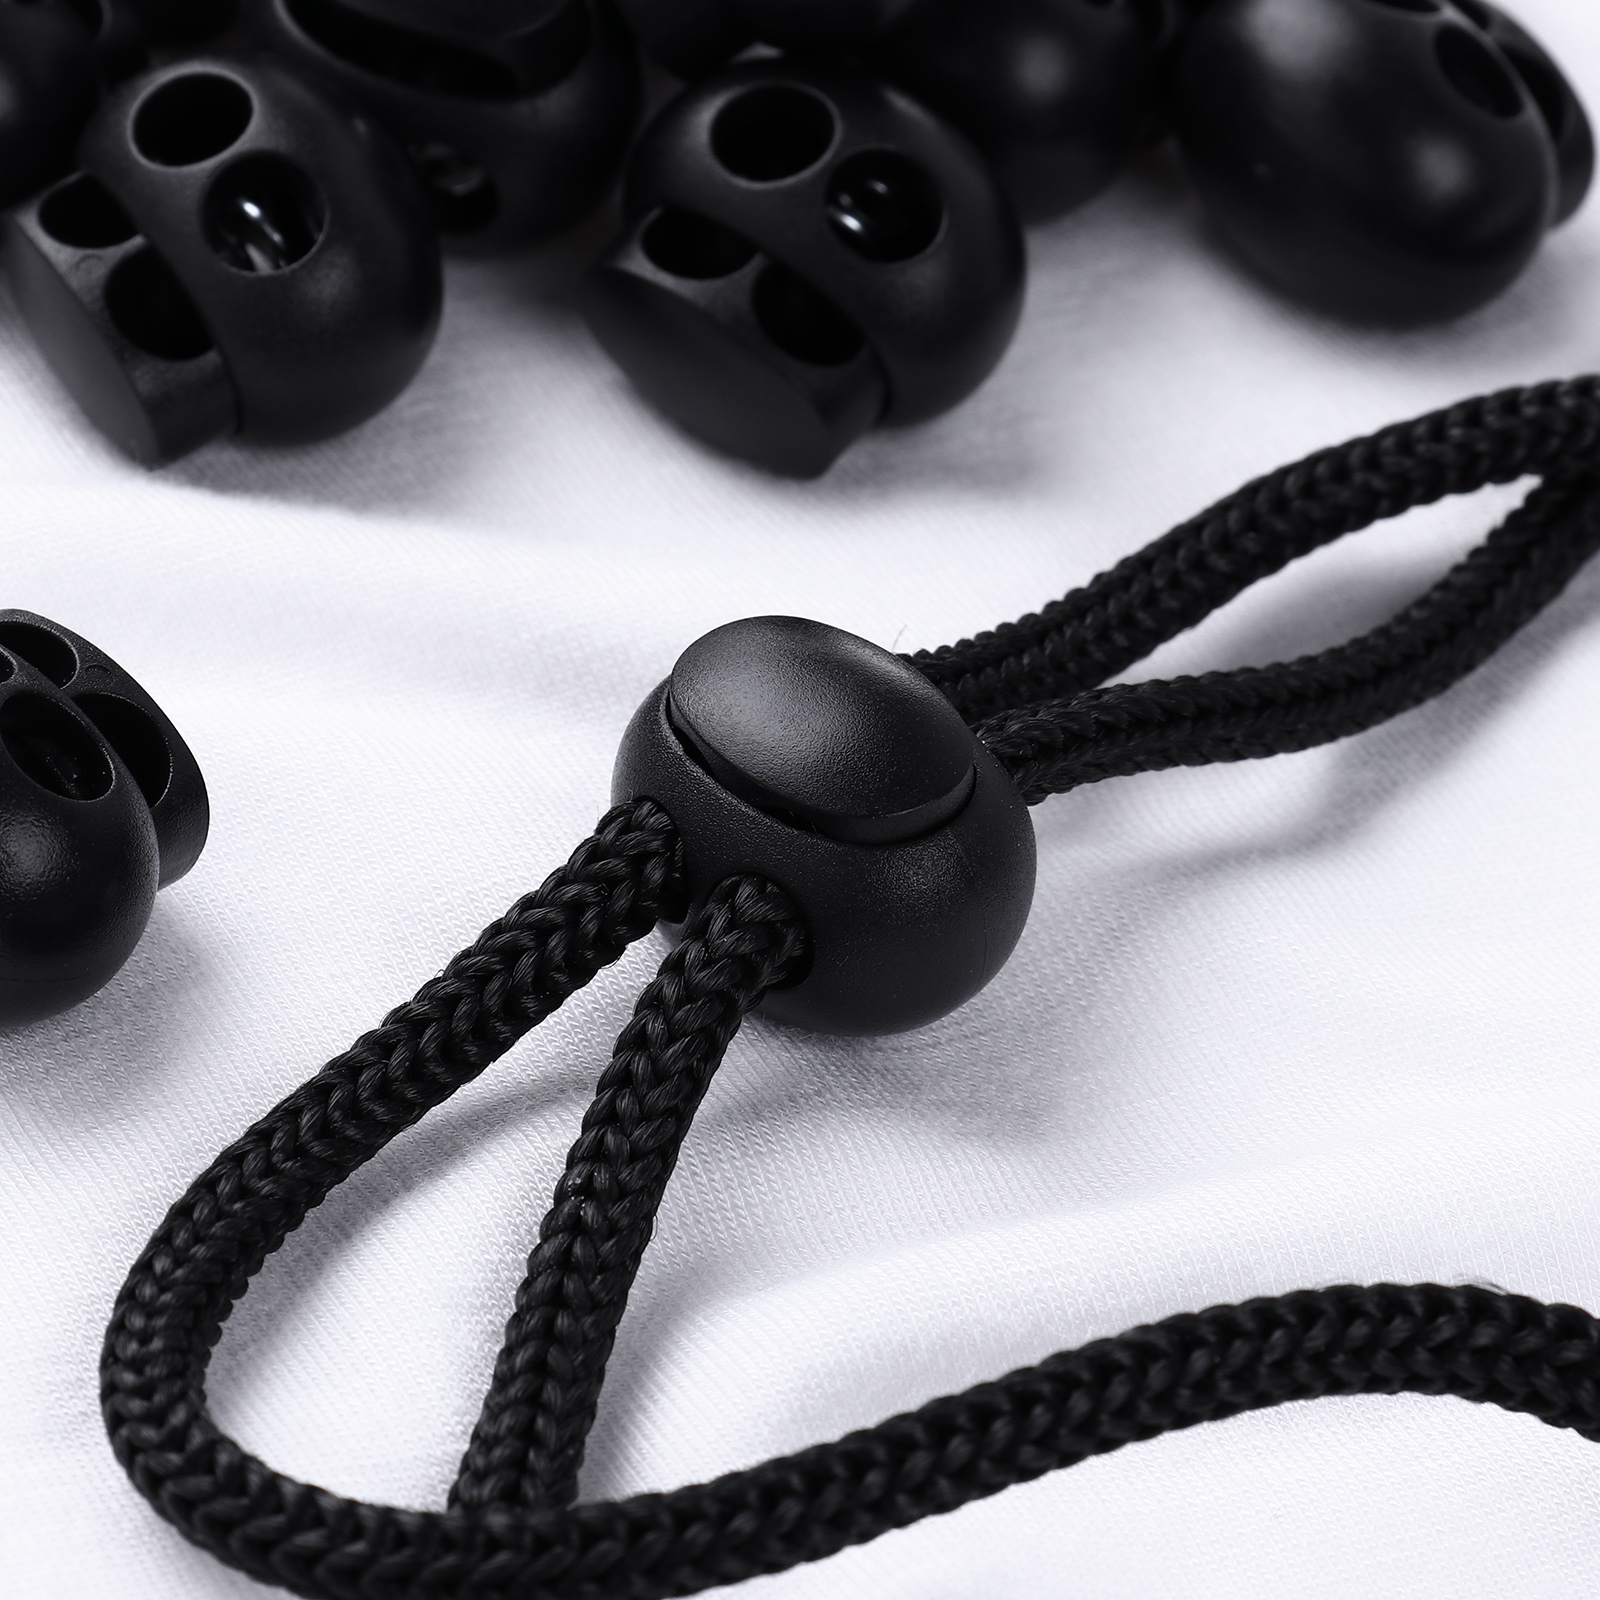 20/50 Black Double Hole Spring Cord Lock Plastic Lanyard Shoelace Fastener Buttons DIY Paracord End Stopper Toggle with Pig Nose